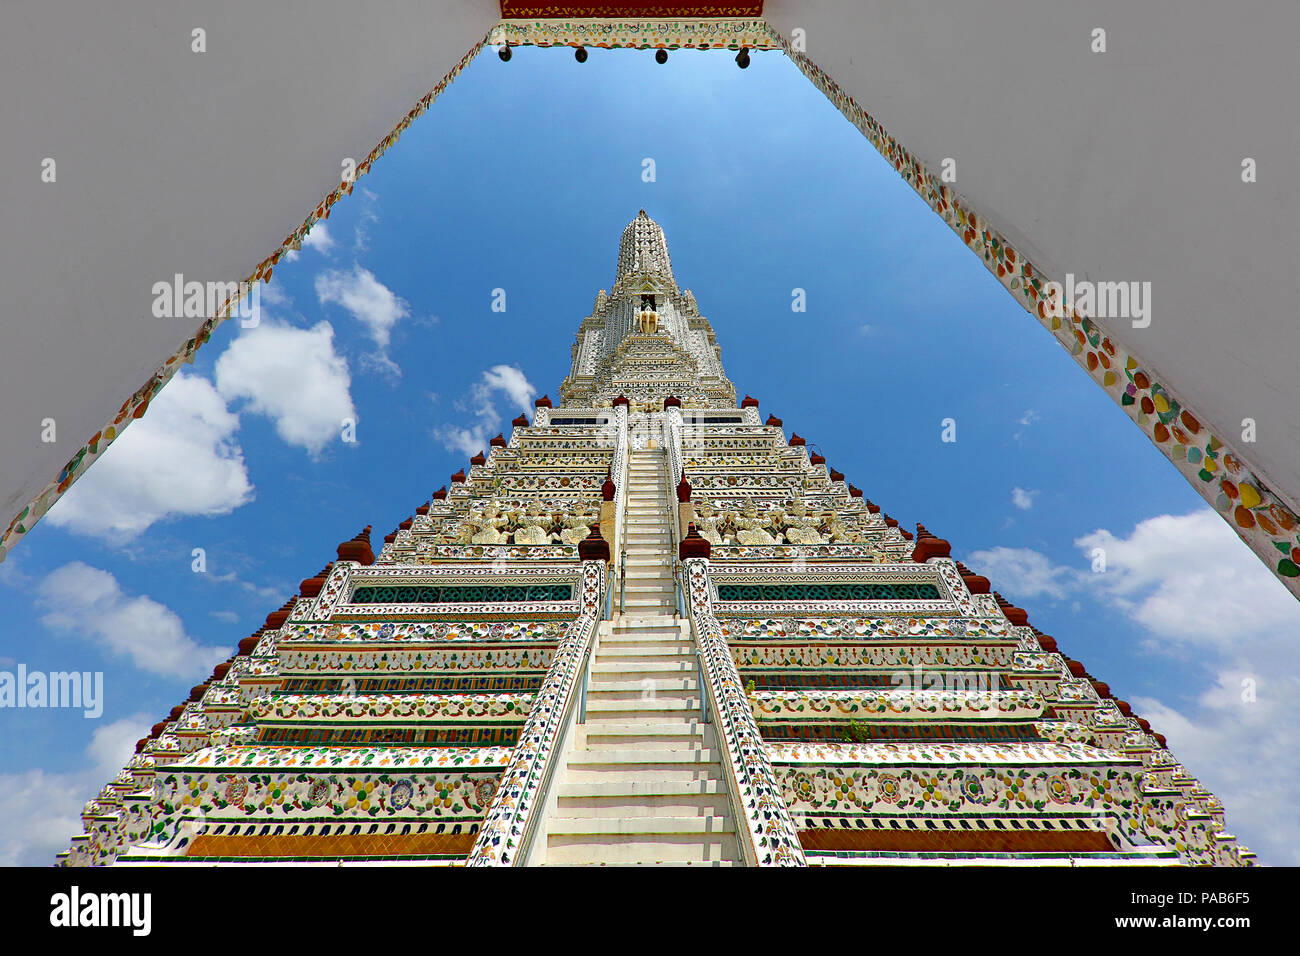 View over Wat Arun Temple through the gate inside, in Bangkok, Thailand. Stock Photo